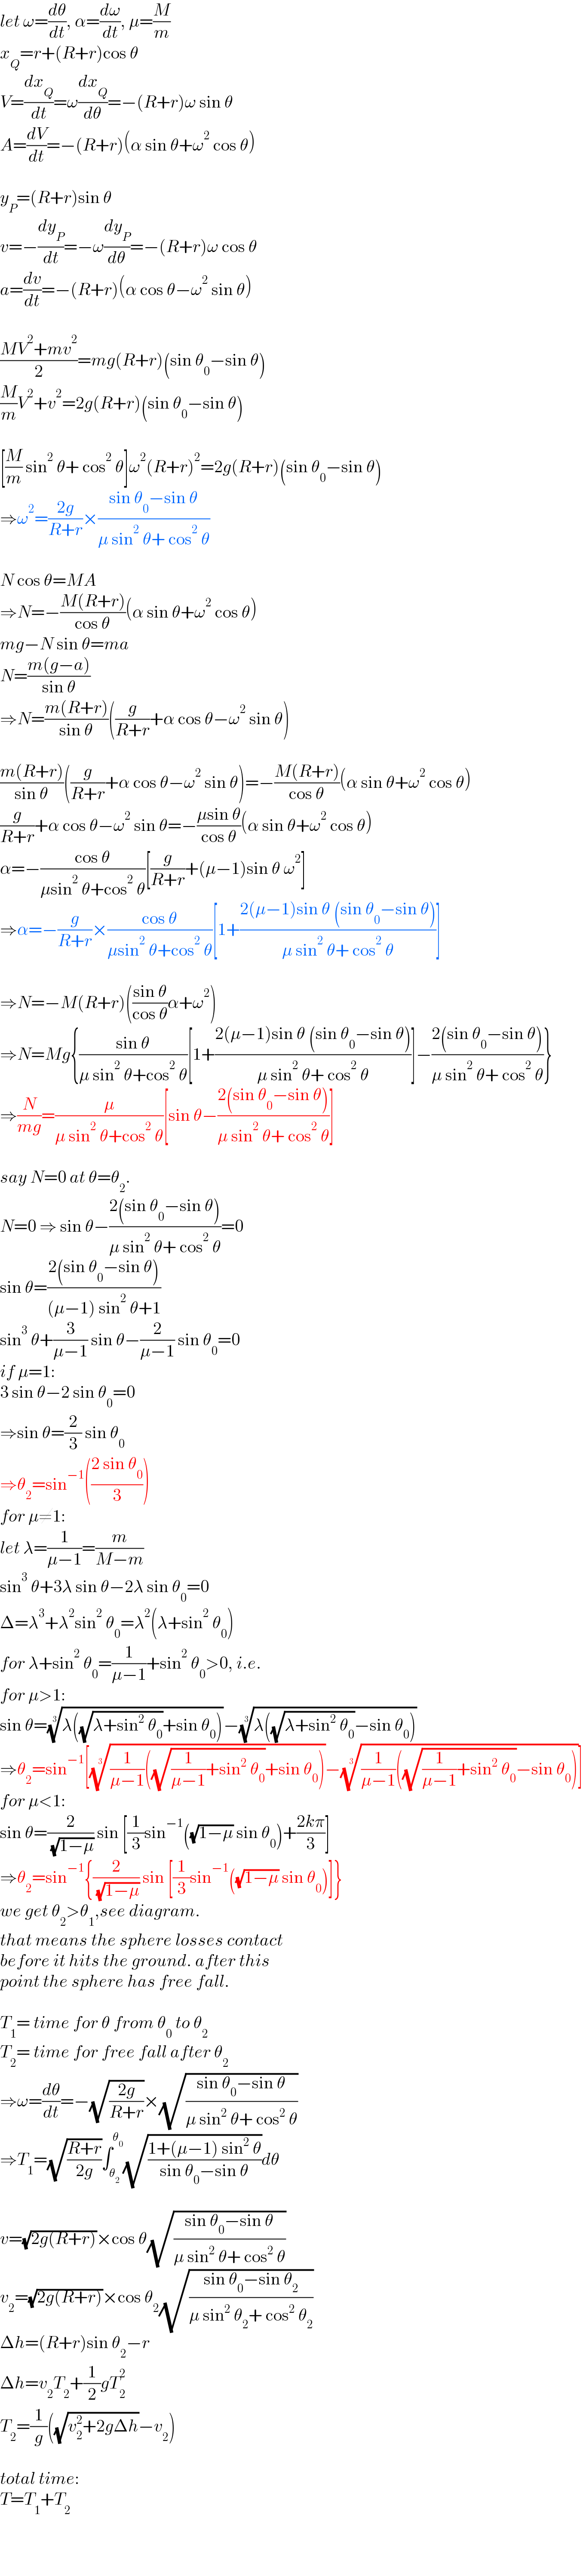 let ω=(dθ/dt), α=(dω/dt), μ=(M/m)  x_Q =r+(R+r)cos θ  V=(dx_Q /dt)=ω(dx_Q /dθ)=−(R+r)ω sin θ  A=(dV/dt)=−(R+r)(α sin θ+ω^2  cos θ)    y_P =(R+r)sin θ  v=−(dy_P /dt)=−ω(dy_P /dθ)=−(R+r)ω cos θ  a=(dv/dt)=−(R+r)(α cos θ−ω^2  sin θ)    ((MV^2 +mv^2 )/2)=mg(R+r)(sin θ_0 −sin θ)  (M/m)V^2 +v^2 =2g(R+r)(sin θ_0 −sin θ)    [(M/m) sin^2  θ+ cos^2  θ]ω^2 (R+r)^2 =2g(R+r)(sin θ_0 −sin θ)  ⇒ω^2 =((2g)/(R+r))×((sin θ_0 −sin θ)/(μ sin^2  θ+ cos^2  θ))    N cos θ=MA  ⇒N=−((M(R+r))/(cos θ))(α sin θ+ω^2  cos θ)  mg−N sin θ=ma  N=((m(g−a))/(sin θ))  ⇒N=((m(R+r))/(sin θ))((g/(R+r))+α cos θ−ω^2  sin θ)    ((m(R+r))/(sin θ))((g/(R+r))+α cos θ−ω^2  sin θ)=−((M(R+r))/(cos θ))(α sin θ+ω^2  cos θ)  (g/(R+r))+α cos θ−ω^2  sin θ=−((μsin θ)/(cos θ))(α sin θ+ω^2  cos θ)  α=−((cos θ)/(μsin^2  θ+cos^2  θ))[(g/(R+r))+(μ−1)sin θ ω^2 ]  ⇒α=−(g/(R+r))×((cos θ)/(μsin^2  θ+cos^2  θ))[1+((2(μ−1)sin θ (sin θ_0 −sin θ))/(μ sin^2  θ+ cos^2  θ))]    ⇒N=−M(R+r)(((sin θ)/(cos θ))α+ω^2 )  ⇒N=Mg{((sin θ)/(μ sin^2  θ+cos^2  θ))[1+((2(μ−1)sin θ (sin θ_0 −sin θ))/(μ sin^2  θ+ cos^2  θ))]−((2(sin θ_0 −sin θ))/(μ sin^2  θ+ cos^2  θ))}  ⇒(N/(mg))=(μ/(μ sin^2  θ+cos^2  θ))[sin θ−((2(sin θ_0 −sin θ))/(μ sin^2  θ+ cos^2  θ))]    say N=0 at θ=θ_2 .  N=0 ⇒ sin θ−((2(sin θ_0 −sin θ))/(μ sin^2  θ+ cos^2  θ))=0  sin θ=((2(sin θ_0 −sin θ))/((μ−1) sin^2  θ+1))  sin^3  θ+(3/(μ−1)) sin θ−(2/(μ−1)) sin θ_0 =0  if μ=1:   3 sin θ−2 sin θ_0 =0  ⇒sin θ=(2/3) sin θ_0   ⇒θ_2 =sin^(−1) (((2 sin θ_0 )/3))  for μ≠1:  let λ=(1/(μ−1))=(m/(M−m))  sin^3  θ+3λ sin θ−2λ sin θ_0 =0  Δ=λ^3 +λ^2 sin^2  θ_0 =λ^2 (λ+sin^2  θ_0 )  for λ+sin^2  θ_0 =(1/(μ−1))+sin^2  θ_0 >0, i.e.  for μ>1:  sin θ=((λ((√(λ+sin^2  θ_0 ))+sin θ_0 )))^(1/3) −((λ((√(λ+sin^2  θ_0 ))−sin θ_0 )))^(1/3)   ⇒θ_2 =sin^(−1) [(((1/(μ−1))((√((1/(μ−1))+sin^2  θ_0 ))+sin θ_0 )))^(1/3) −(((1/(μ−1))((√((1/(μ−1))+sin^2  θ_0 ))−sin θ_0 )))^(1/3) ]  for μ<1:  sin θ=(2/( (√(1−μ)))) sin [(1/3)sin^(−1) ((√(1−μ)) sin θ_0 )+((2kπ)/3)]  ⇒θ_2 =sin^(−1) {(2/( (√(1−μ)))) sin [(1/3)sin^(−1) ((√(1−μ)) sin θ_0 )]}  we get θ_2 >θ_1 ,see diagram.  that means the sphere losses contact  before it hits the ground. after this  point the sphere has free fall.    T_1 = time for θ from θ_0  to θ_2   T_2 = time for free fall after θ_2   ⇒ω=(dθ/dt)=−(√((2g)/(R+r)))×(√((sin θ_0 −sin θ)/(μ sin^2  θ+ cos^2  θ)))  ⇒T_1 =(√((R+r)/(2g)))∫_θ_2  ^θ_0  (√((1+(μ−1) sin^2  θ)/(sin θ_0 −sin θ)))dθ    v=(√(2g(R+r)))×cos θ(√((sin θ_0 −sin θ)/(μ sin^2  θ+ cos^2  θ)))  v_2 =(√(2g(R+r)))×cos θ_2 (√((sin θ_0 −sin θ_2 )/(μ sin^2  θ_2 + cos^2  θ_2 )))  Δh=(R+r)sin θ_2 −r  Δh=v_2 T_2 +(1/2)gT_2 ^2   T_2 =(1/g)((√(v_2 ^2 +2gΔh))−v_2 )    total time:  T=T_1 +T_2   